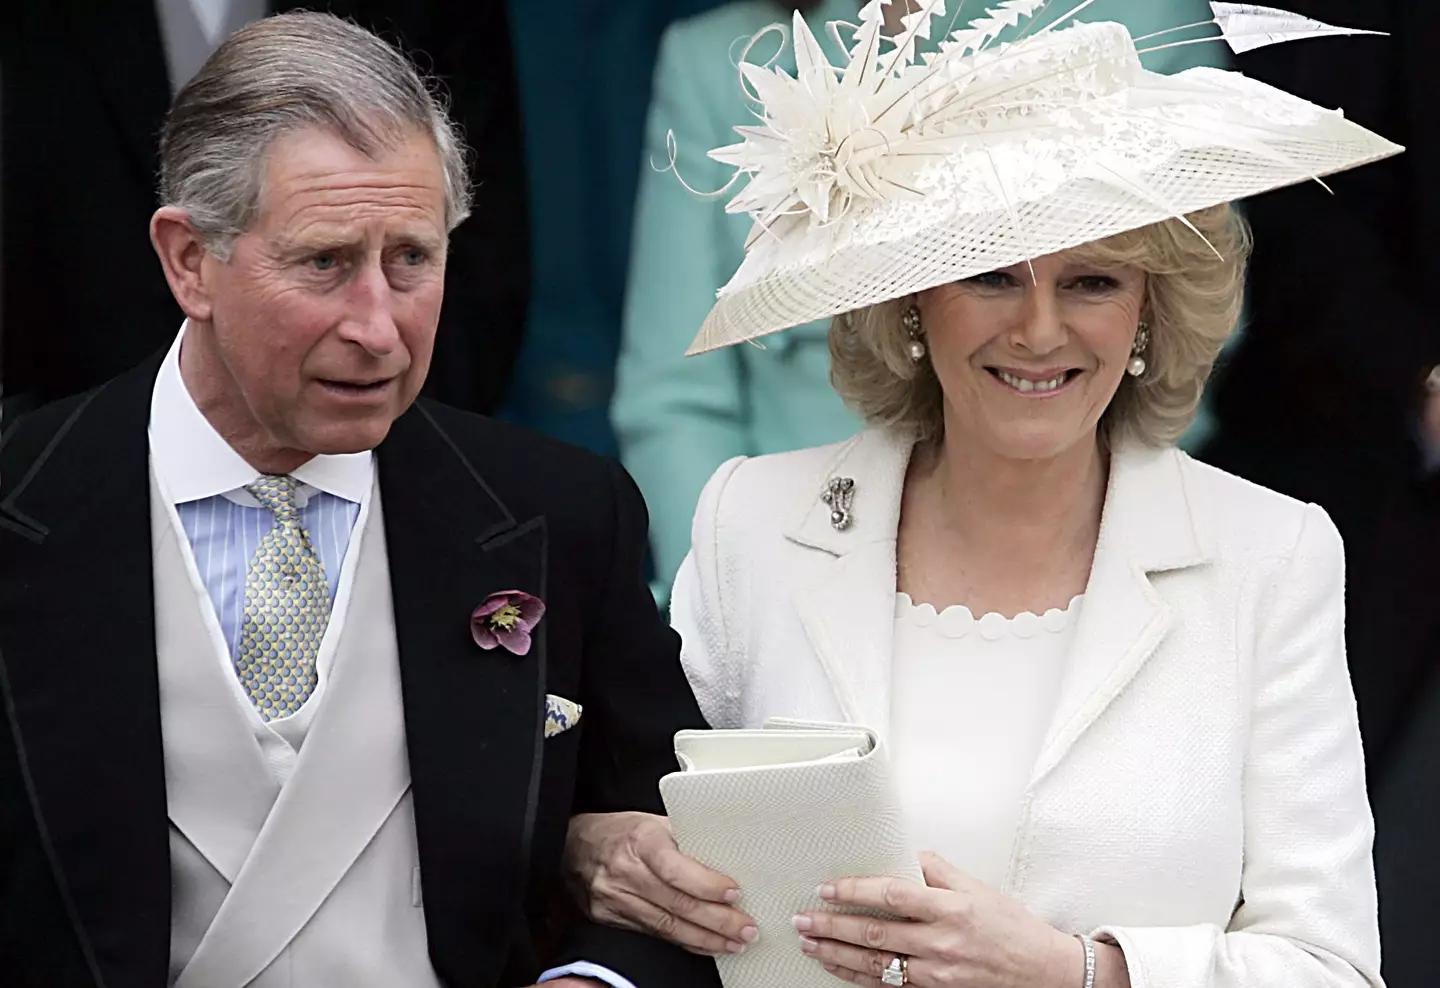 Queen Consort Camilla will wear a crown that has already been used during the coronation.